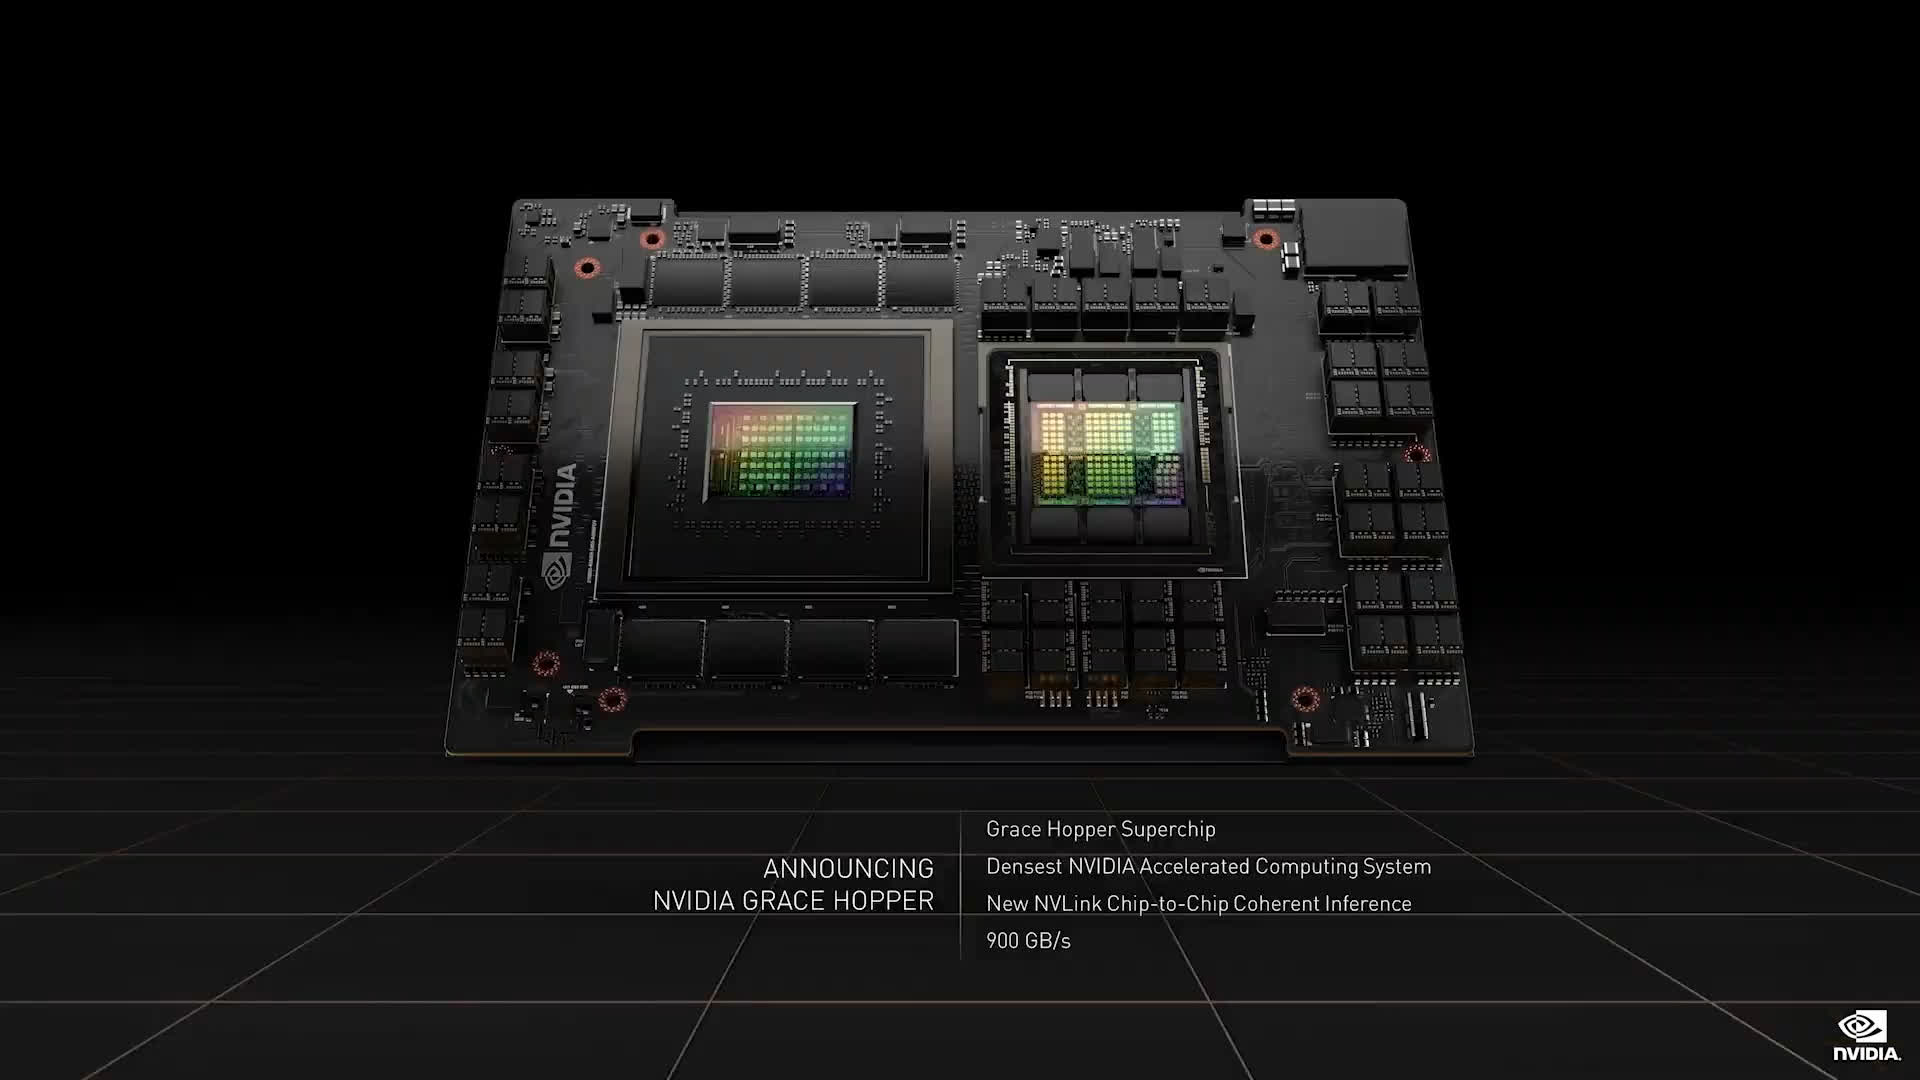 Nvidia unveils next generation Hopper GPU architecture, and more accelerated applications at GTC 2022